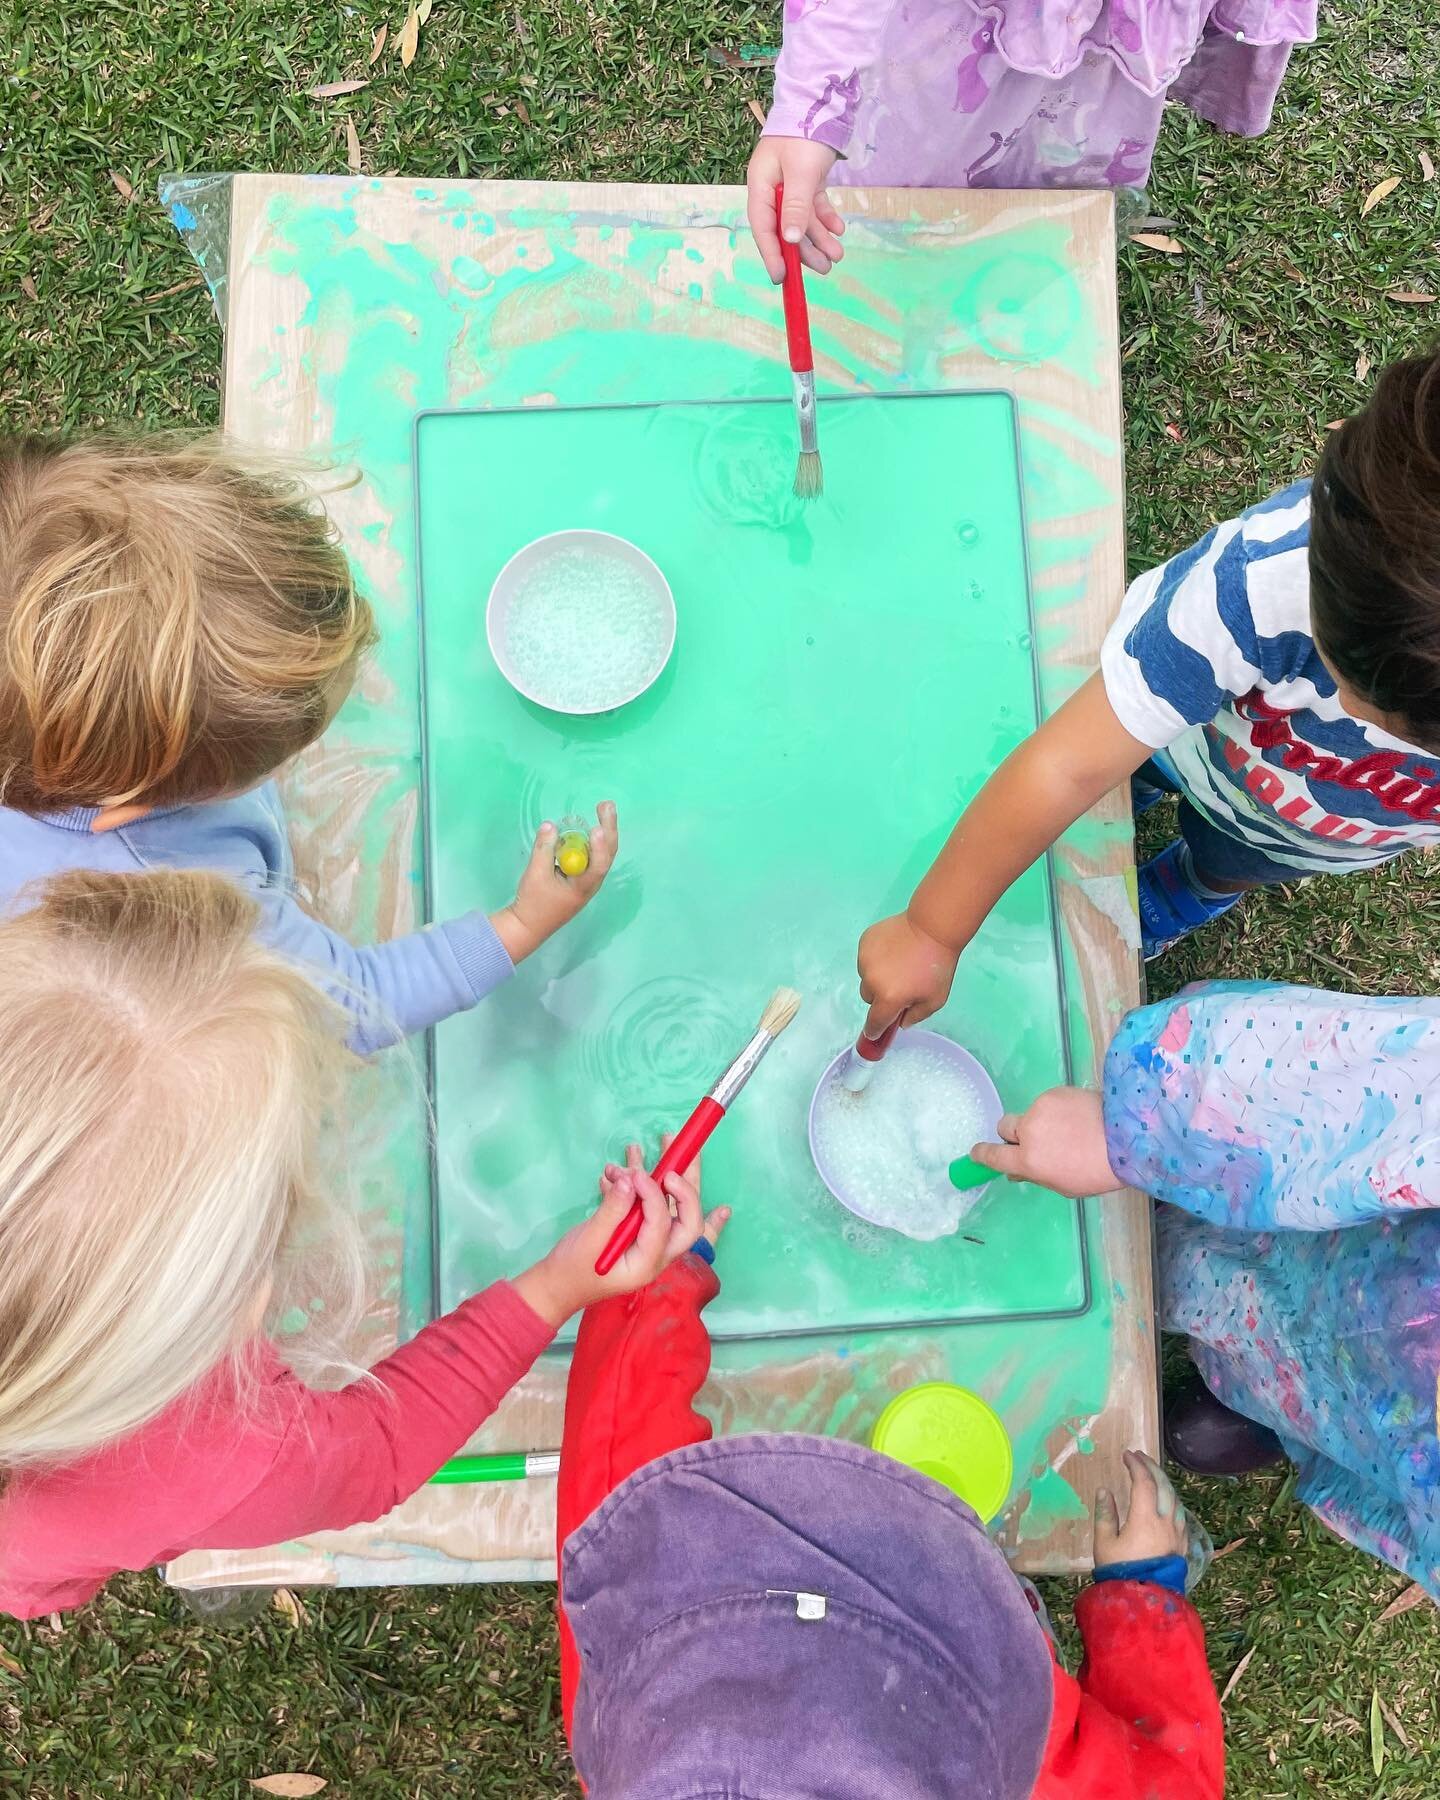 🌈Baking Soda &amp; Vinegar Paint🎨

Did not turn out like I had imagined BUT was still a ton of fun!🤩 

I tried mixing blue paint with baking soda and green paint with vinegar thinking when you mixed the colours together on the mat they would bubbl